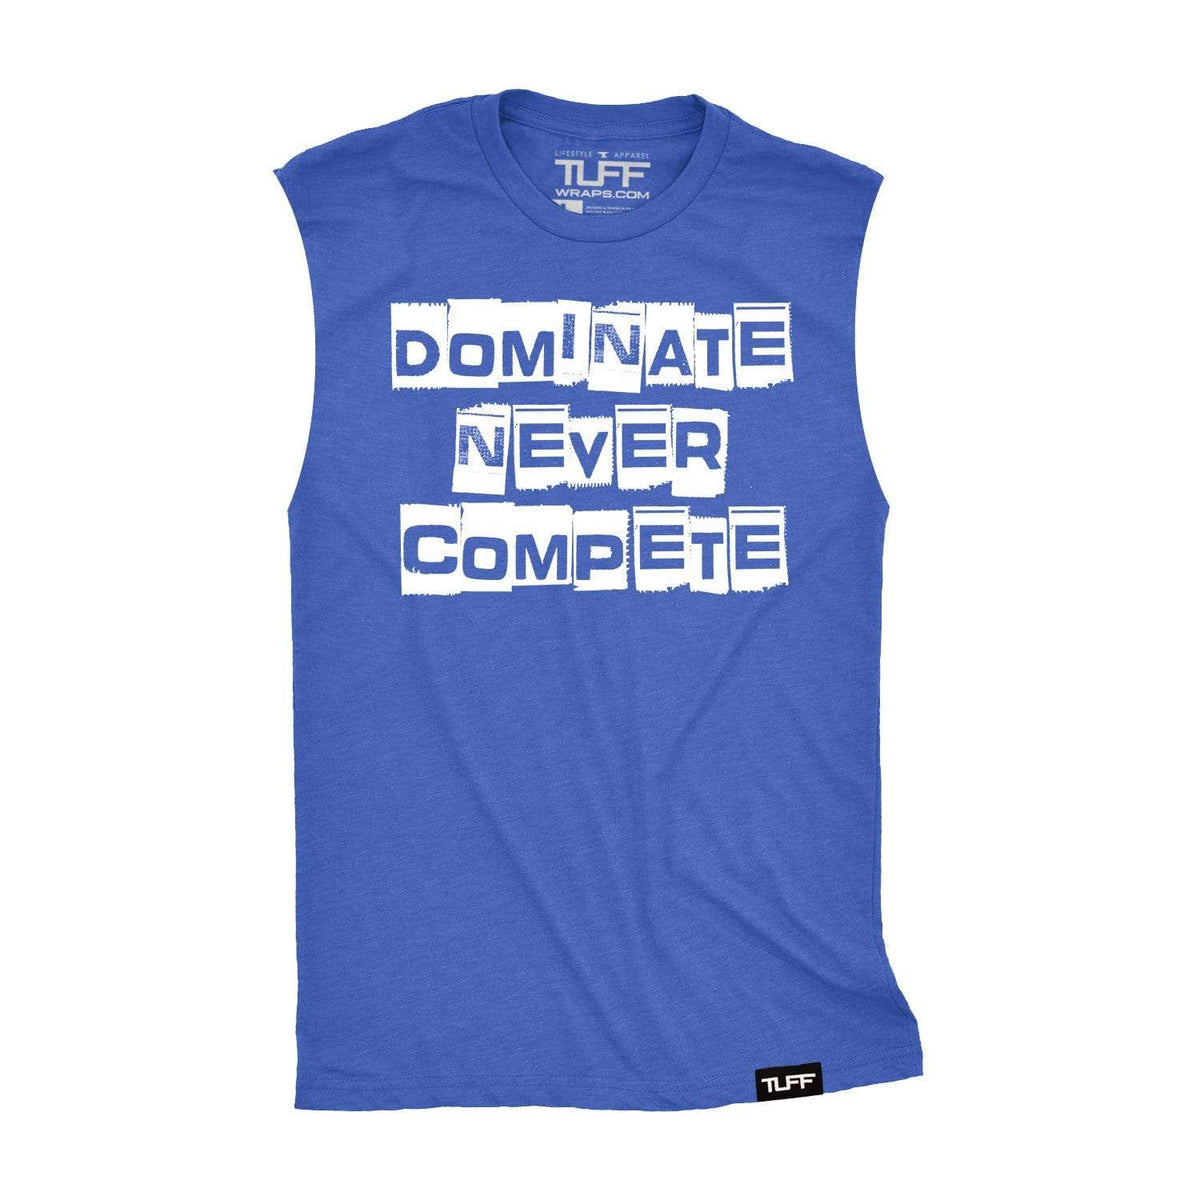 Dominate Never Compete Raw Edge Muscle Tank S / Royal Blue TuffWraps.com